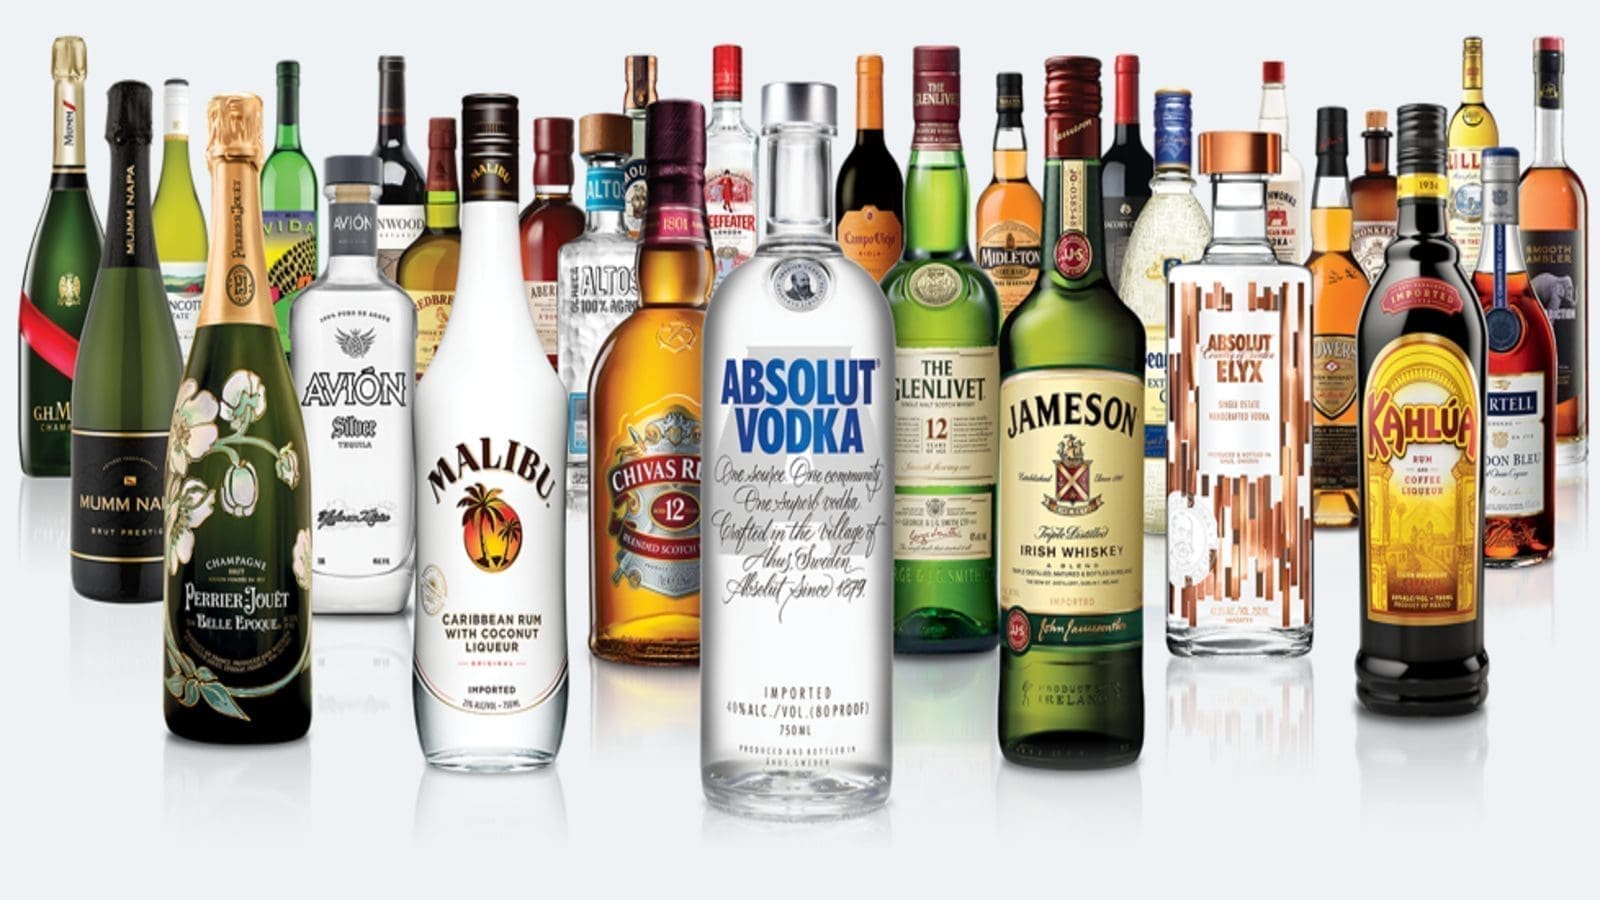 Leading Indian distiller Tilaknagar Industries to manufacture products for Pernod Ricard